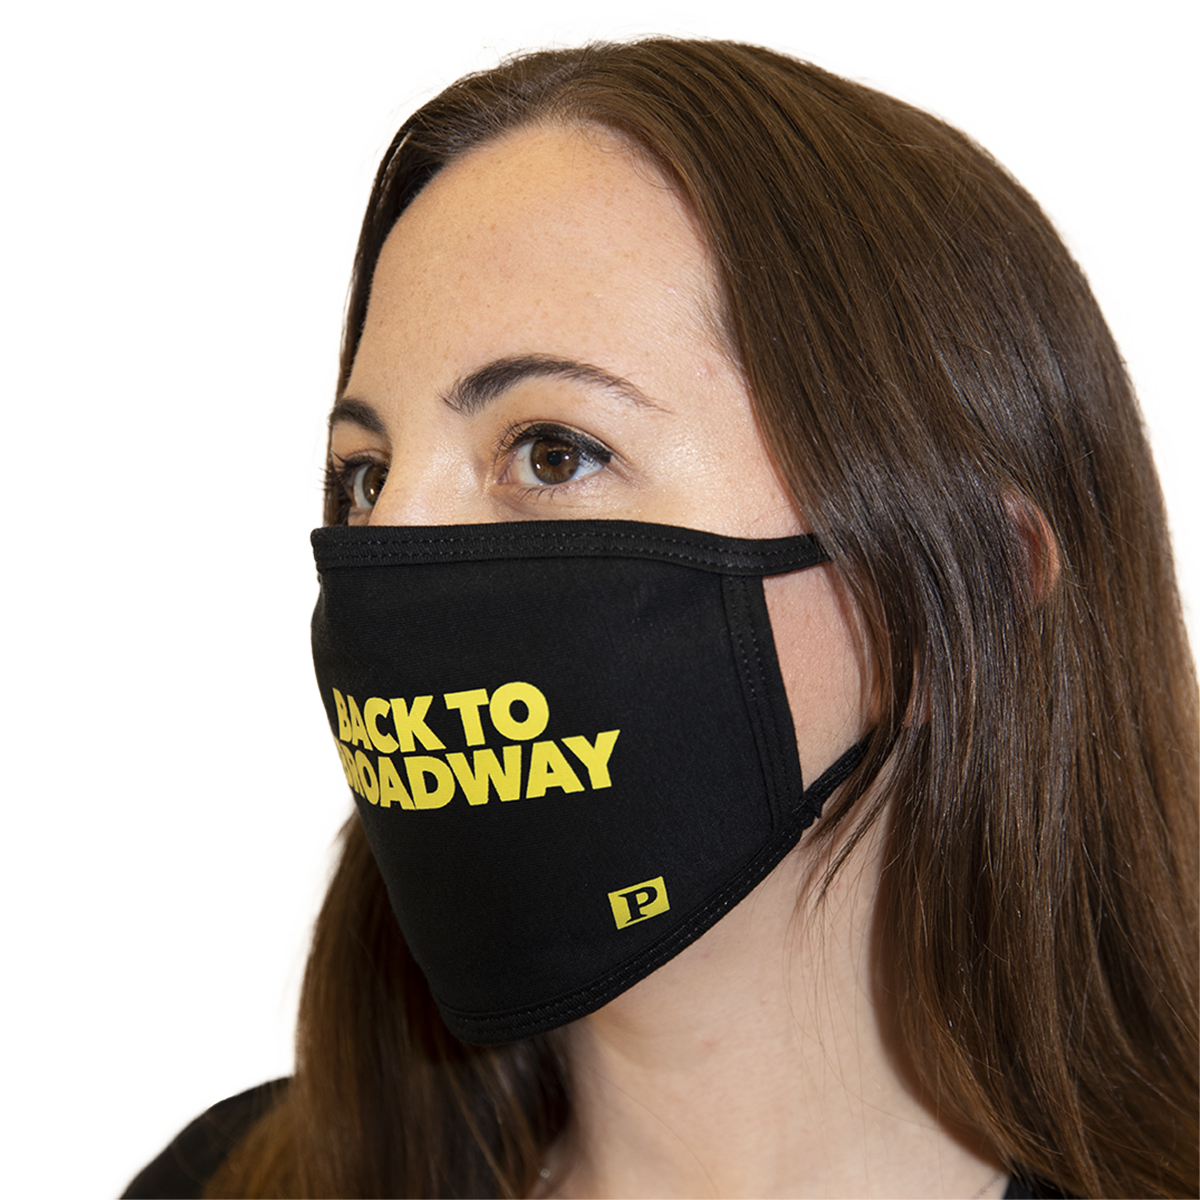 Playbill Back to Broadway Face Mask